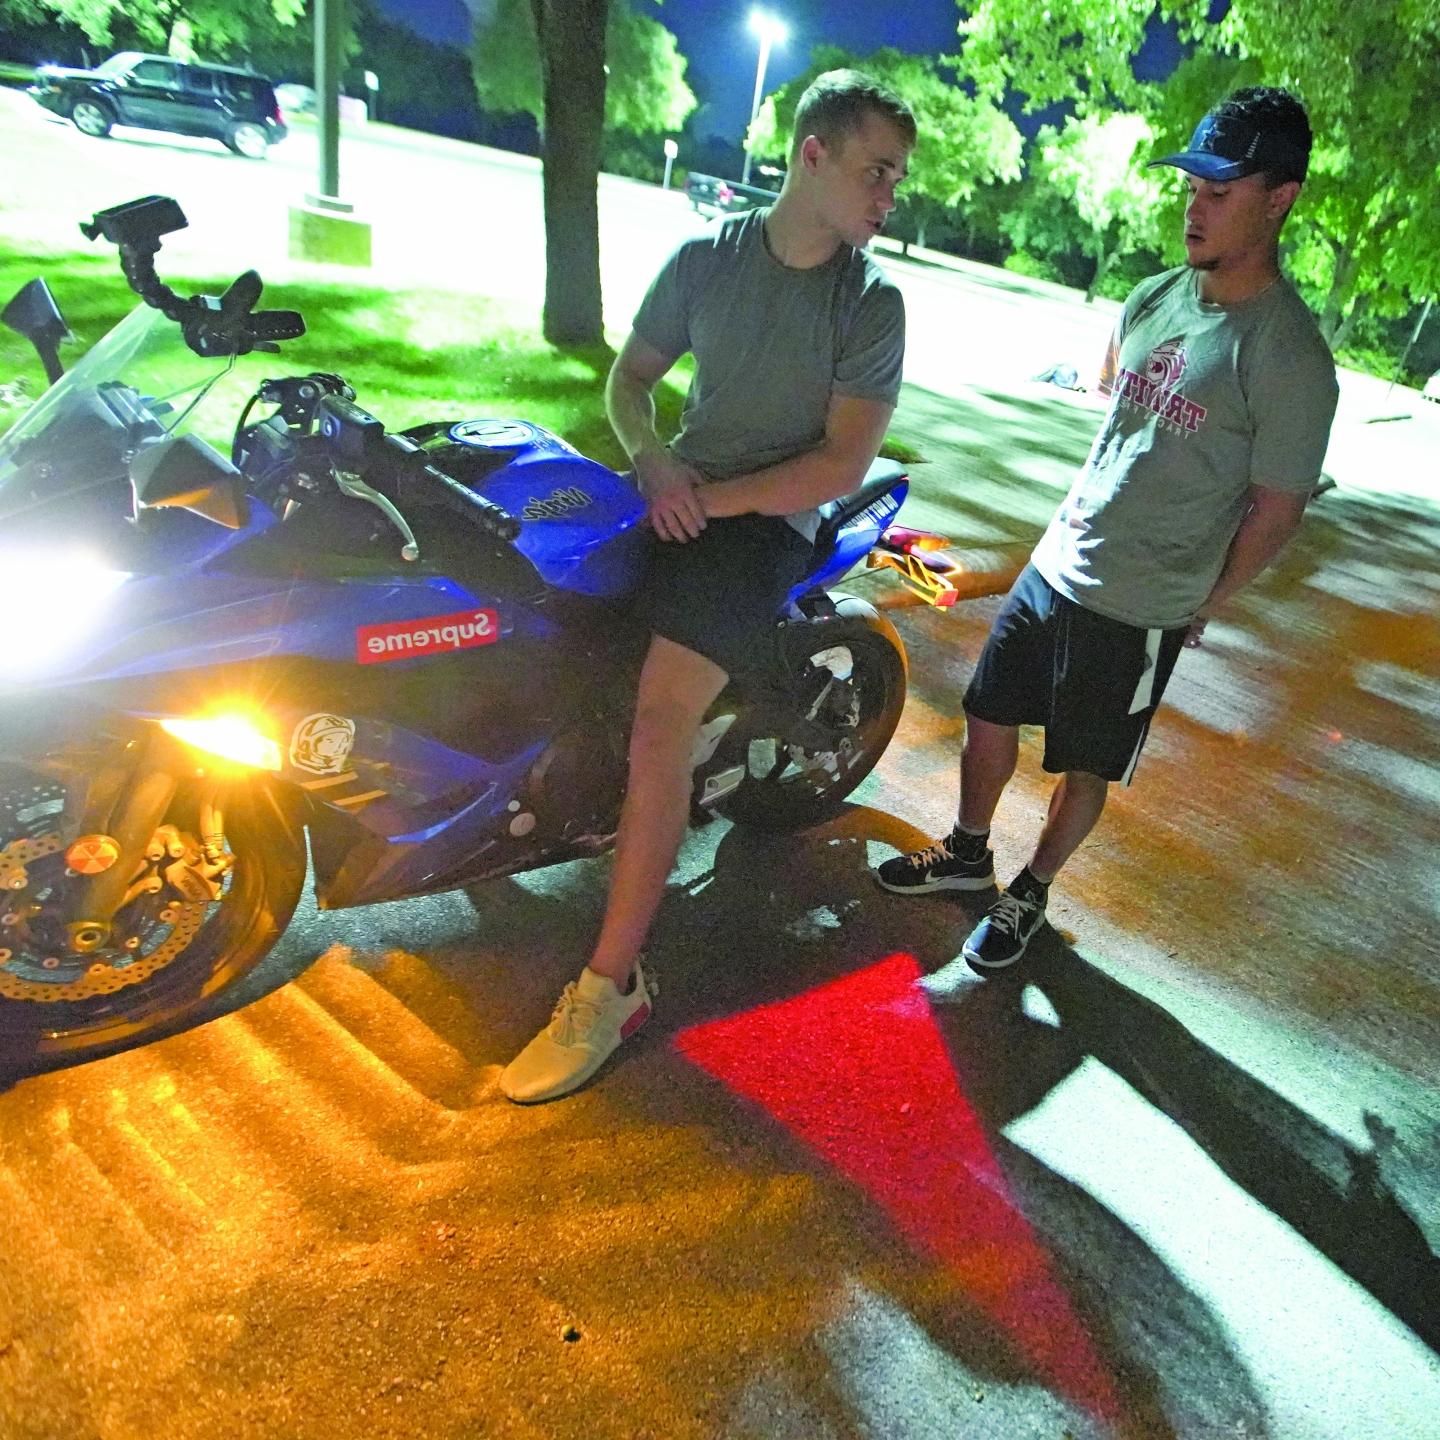 Chris Stewart and Bobby Magee sit on a motorcycle with a red turn signal projected on the asphalt below them.